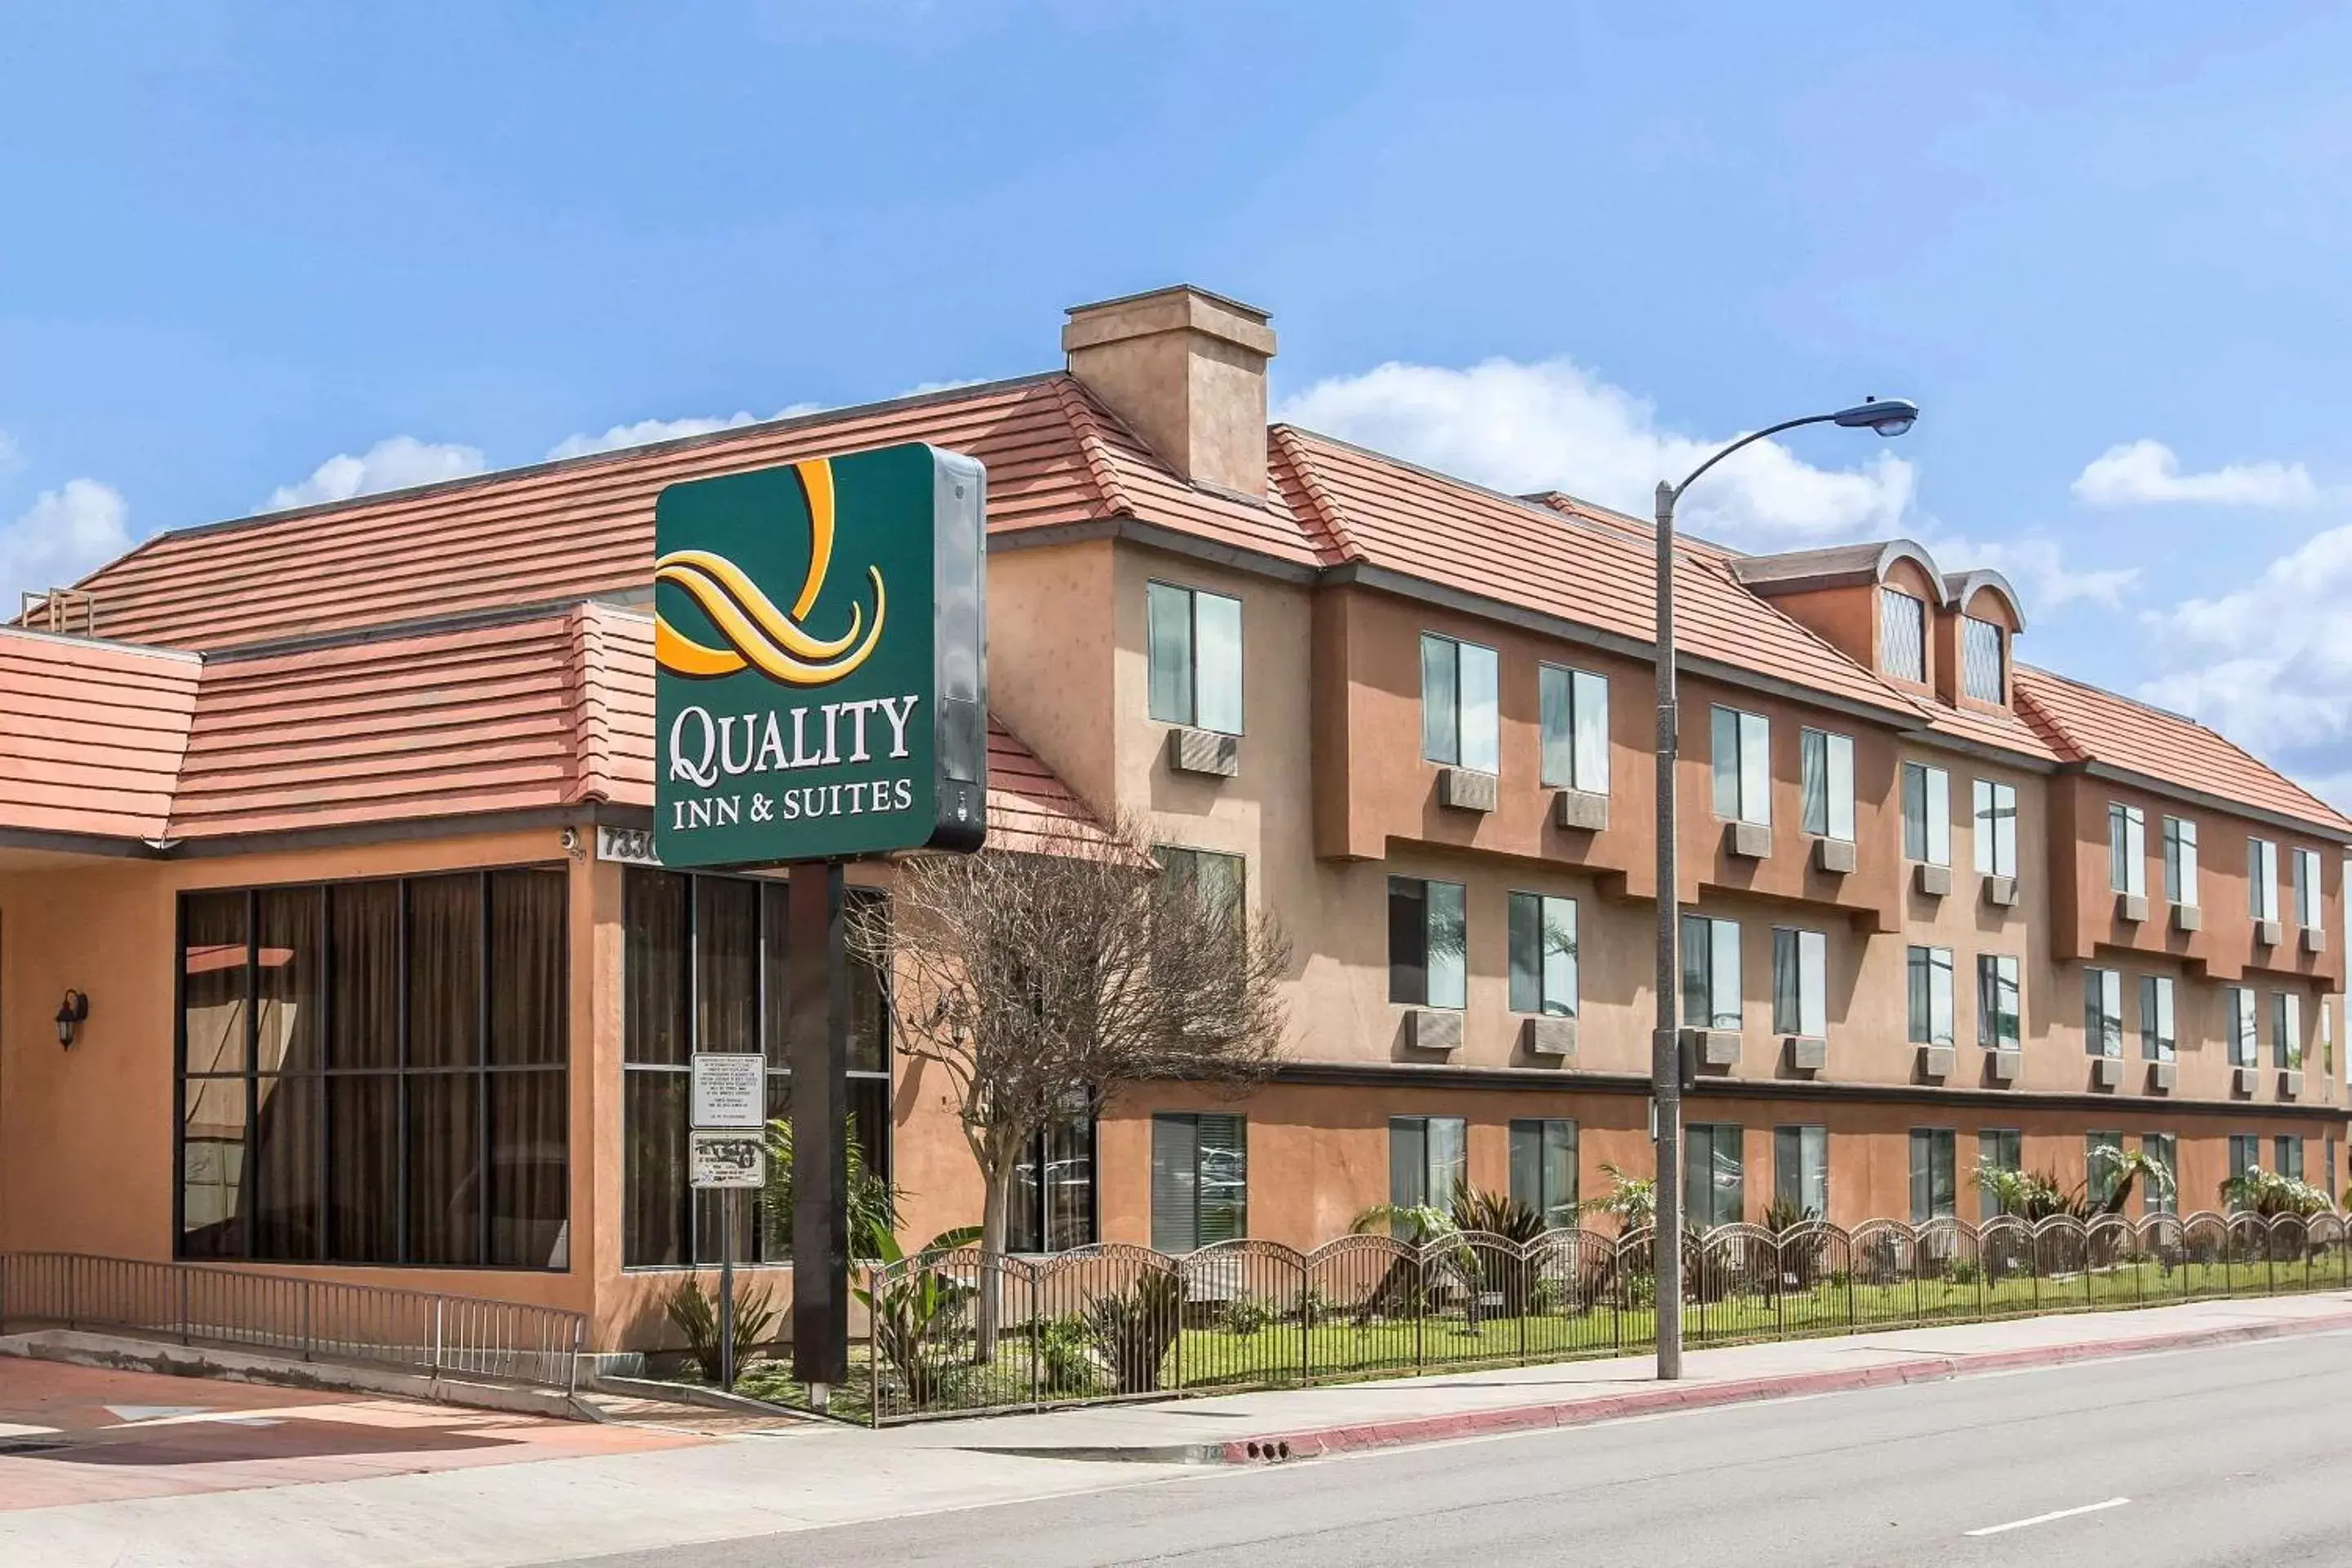 Property building in Quality Inn & Suites Bell Gardens-Los Angeles